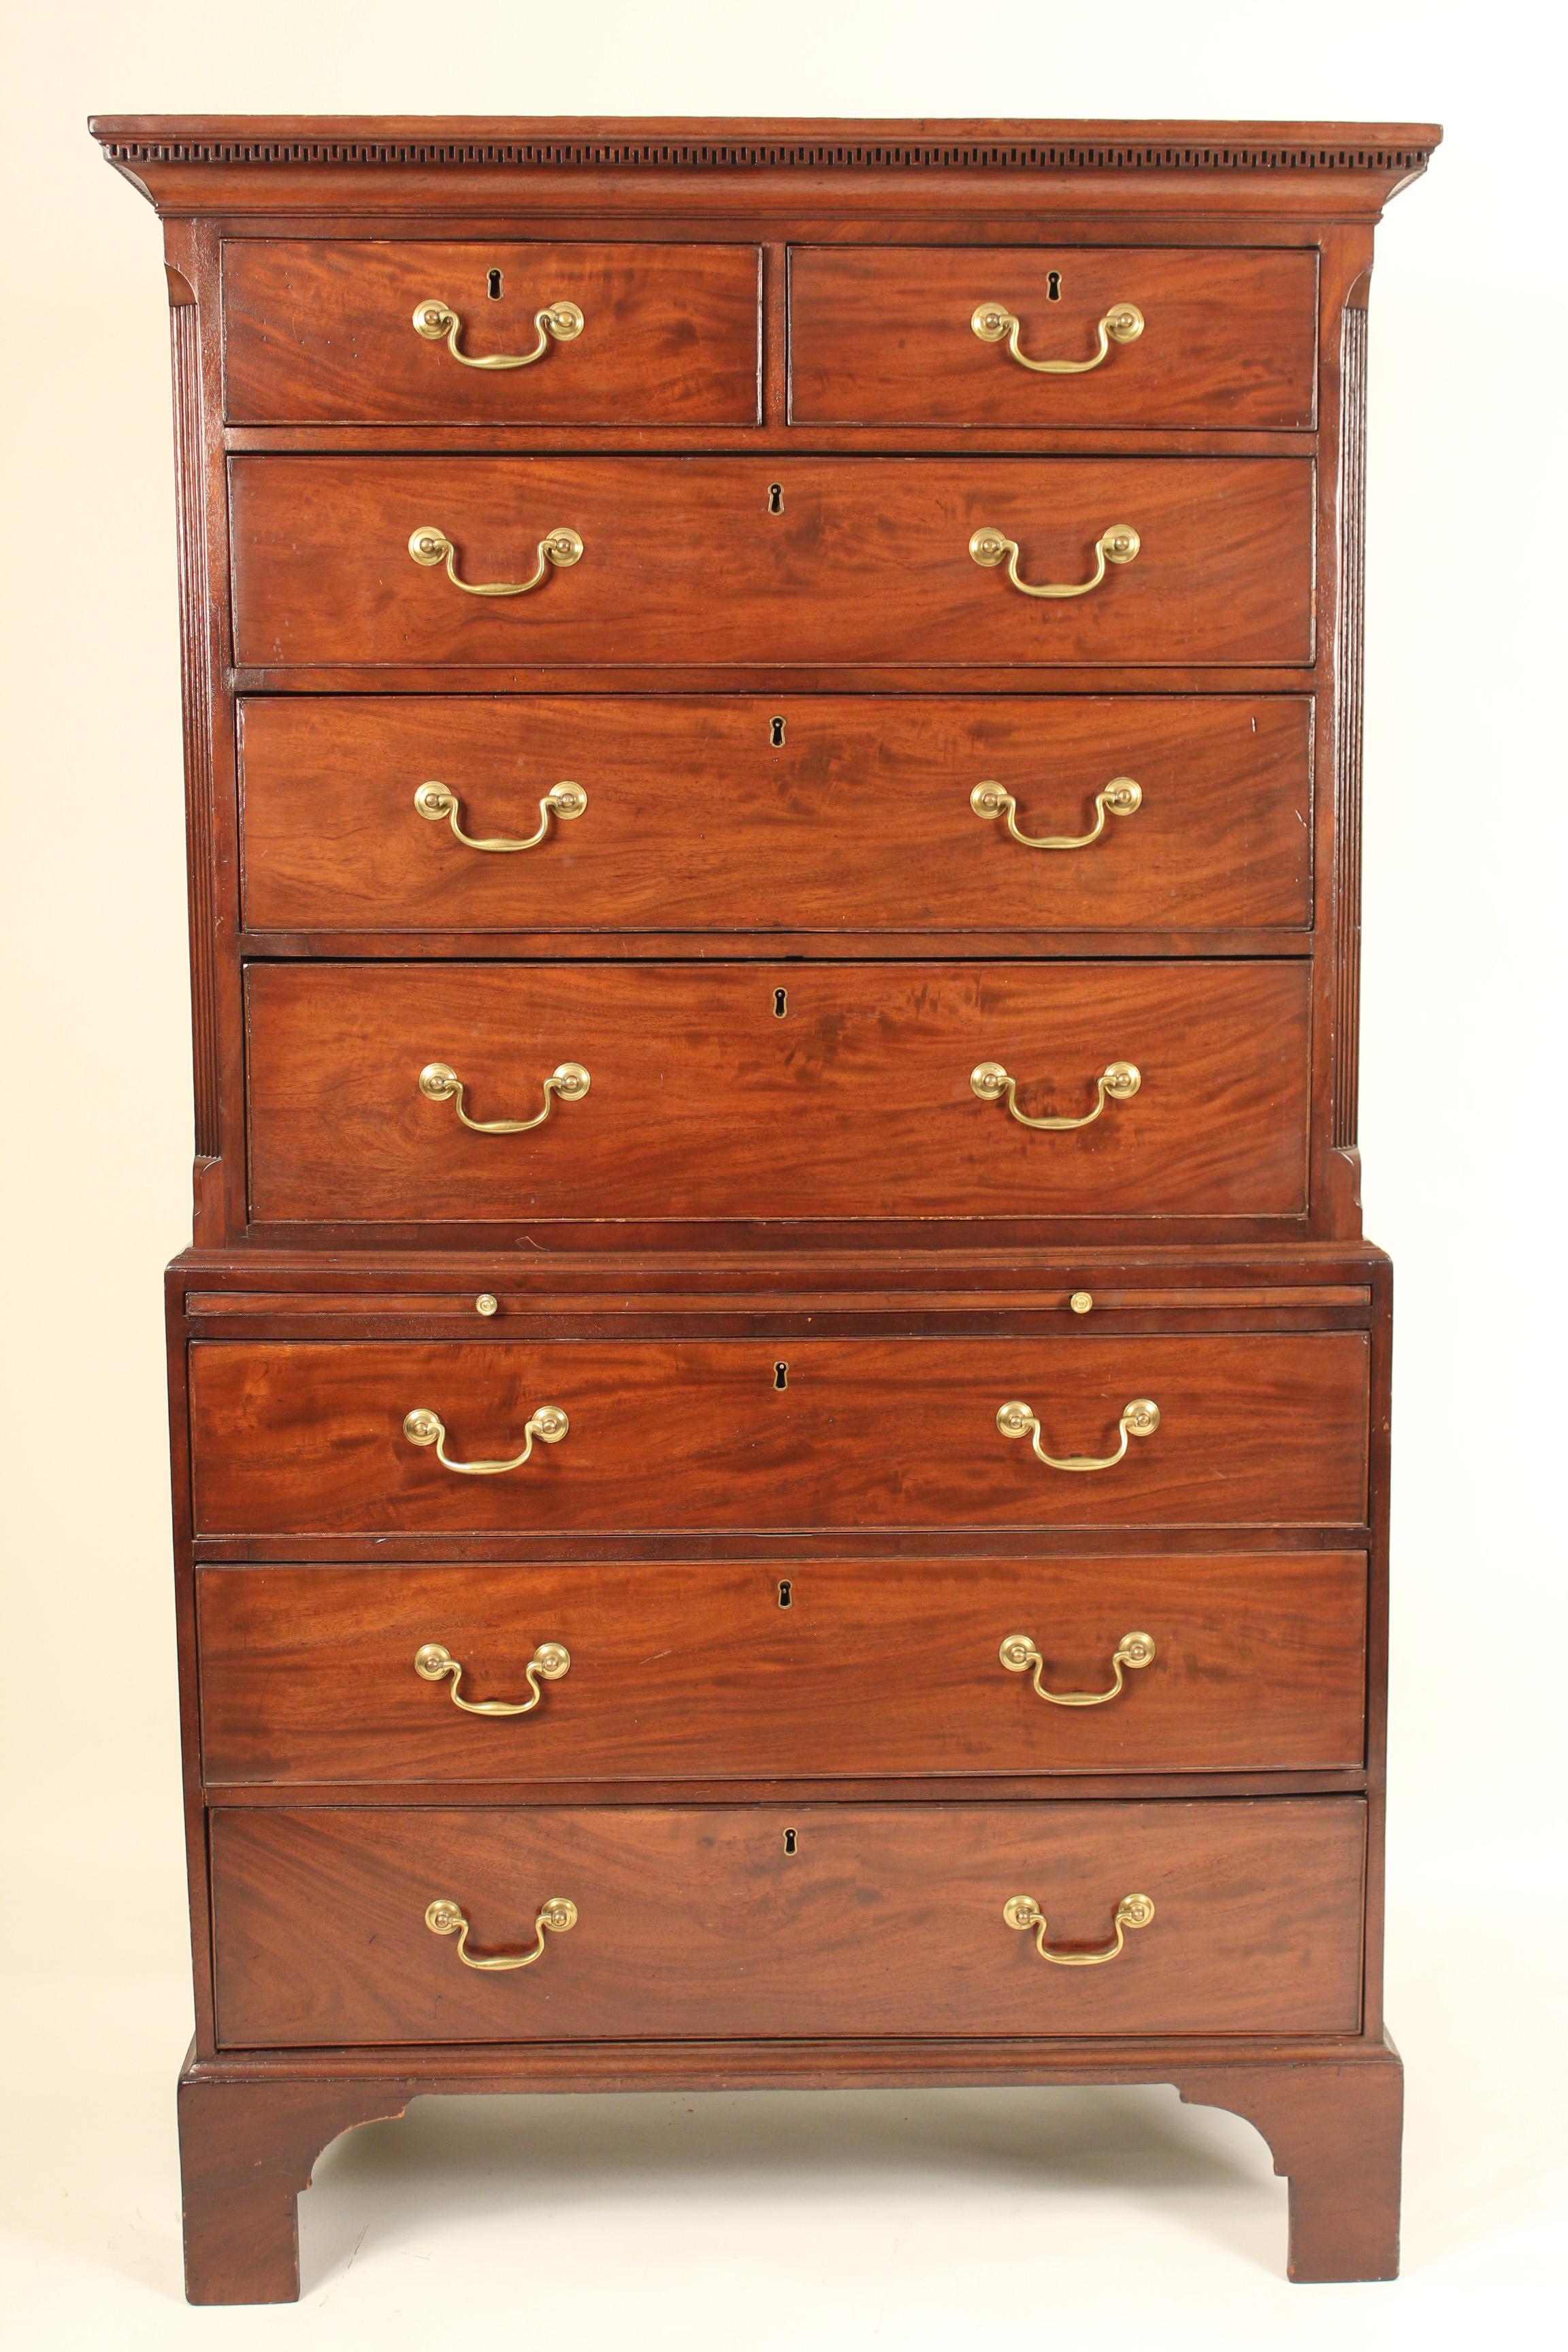 George III mahogany chest on chest, late 18th century. With nice lively mahogany used on the front drawers. The top section with dental molding on the pediment and canted corners with fluted columns. The bottom section with a pull out felt lined